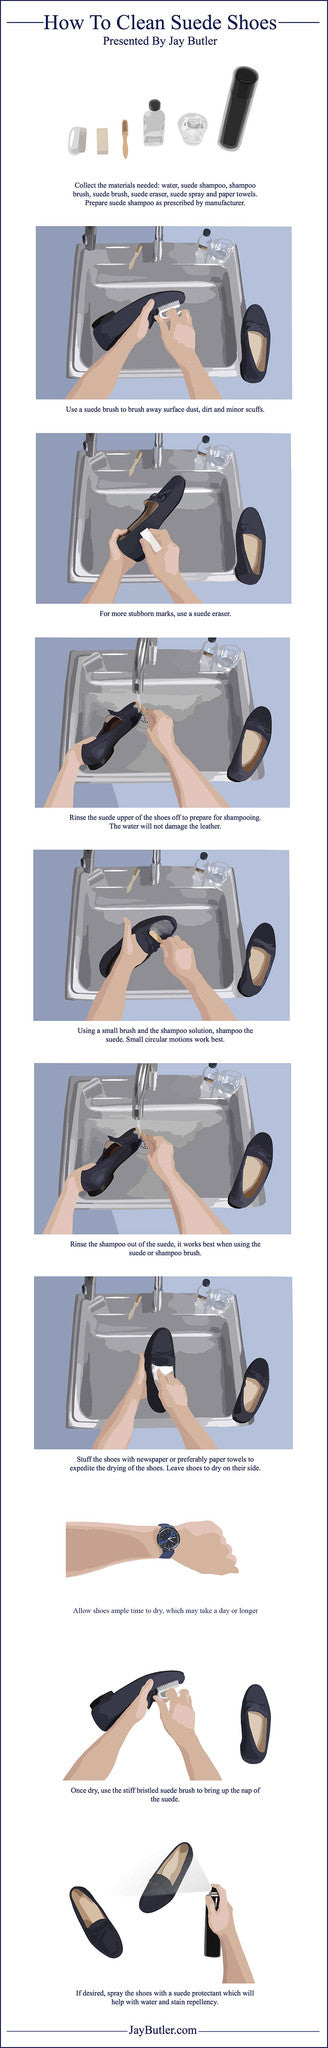 how to clean suede shoes infographic